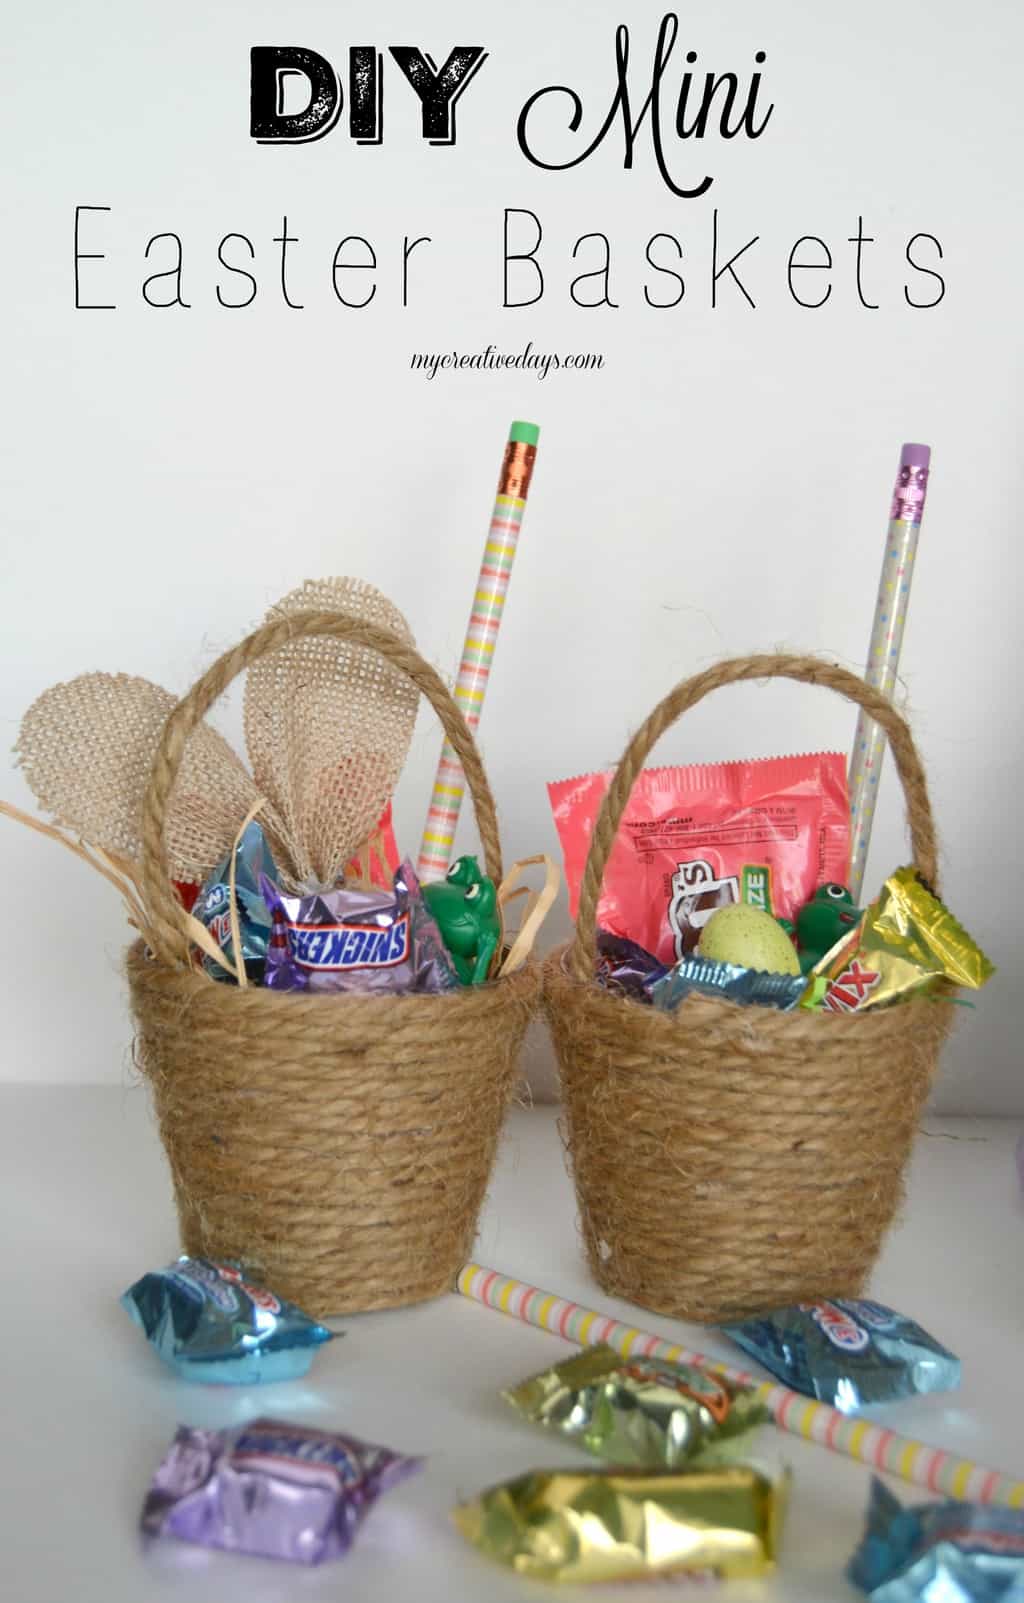 Homemade Easter Baskets Made From Supplies You Have At Home